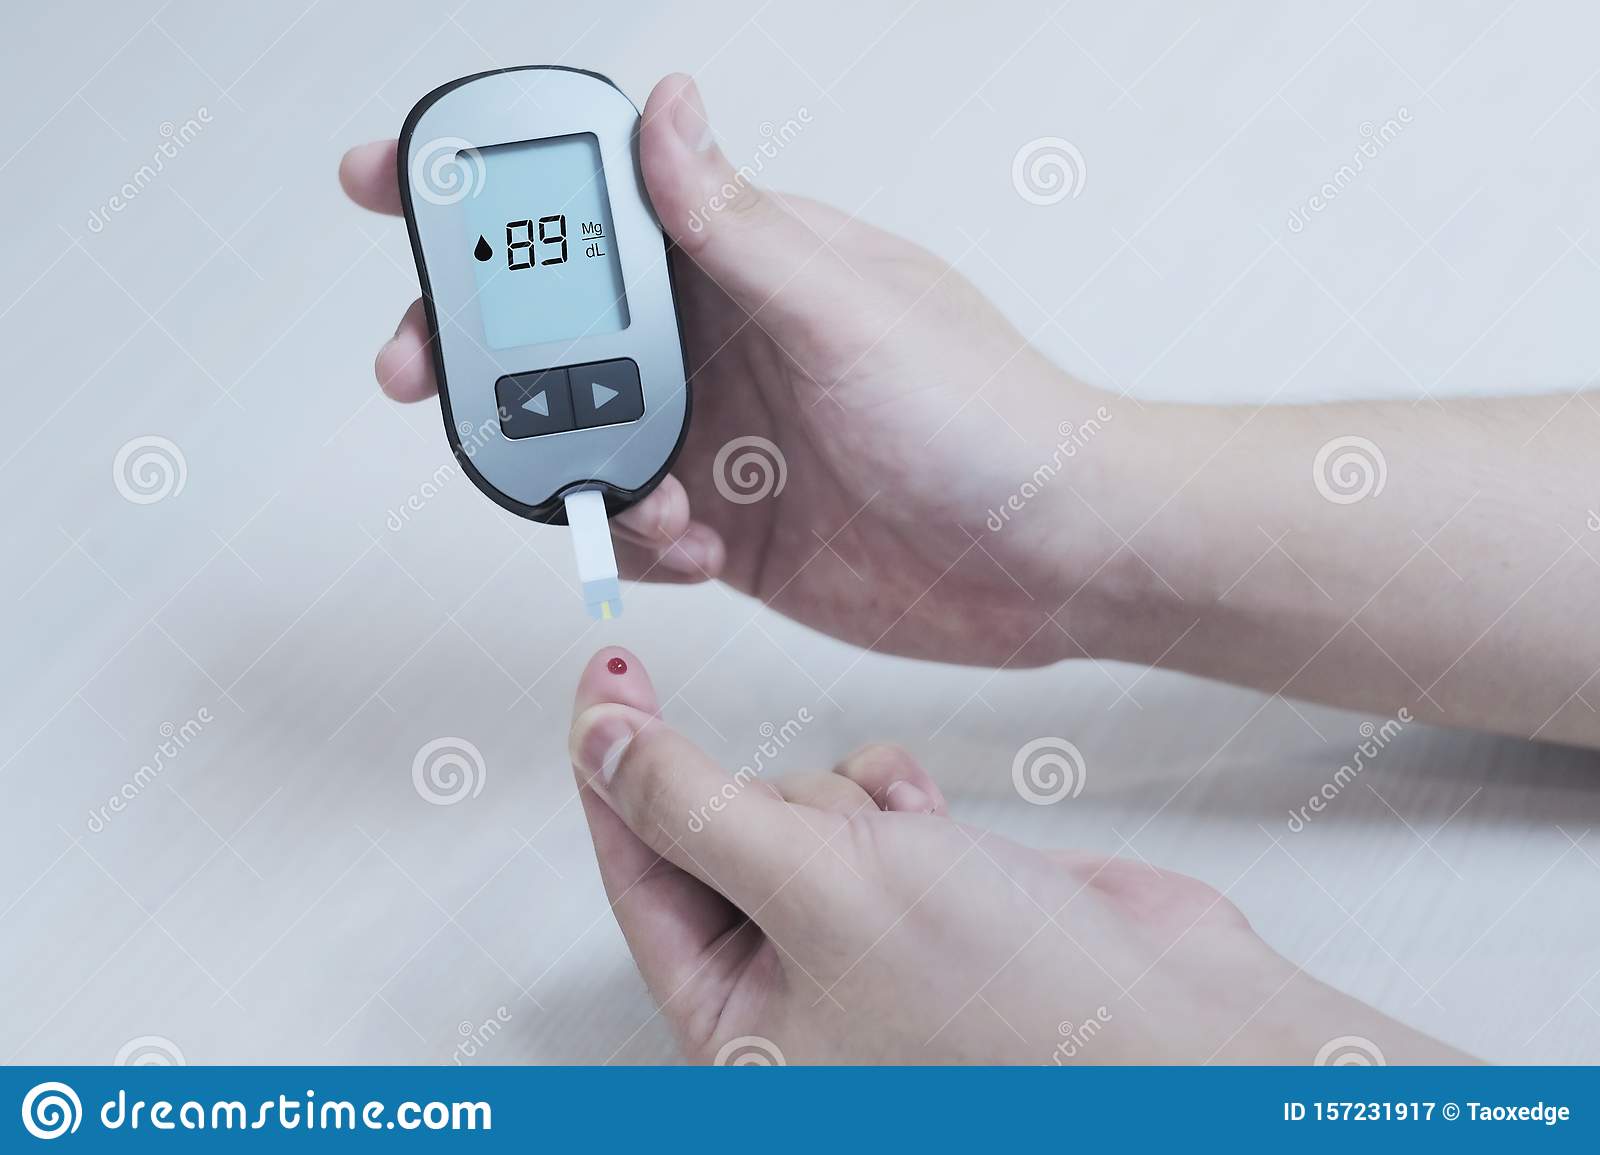 Diabetes Patients Use A Sugar Glucose Meter To Measure Their Blood ...